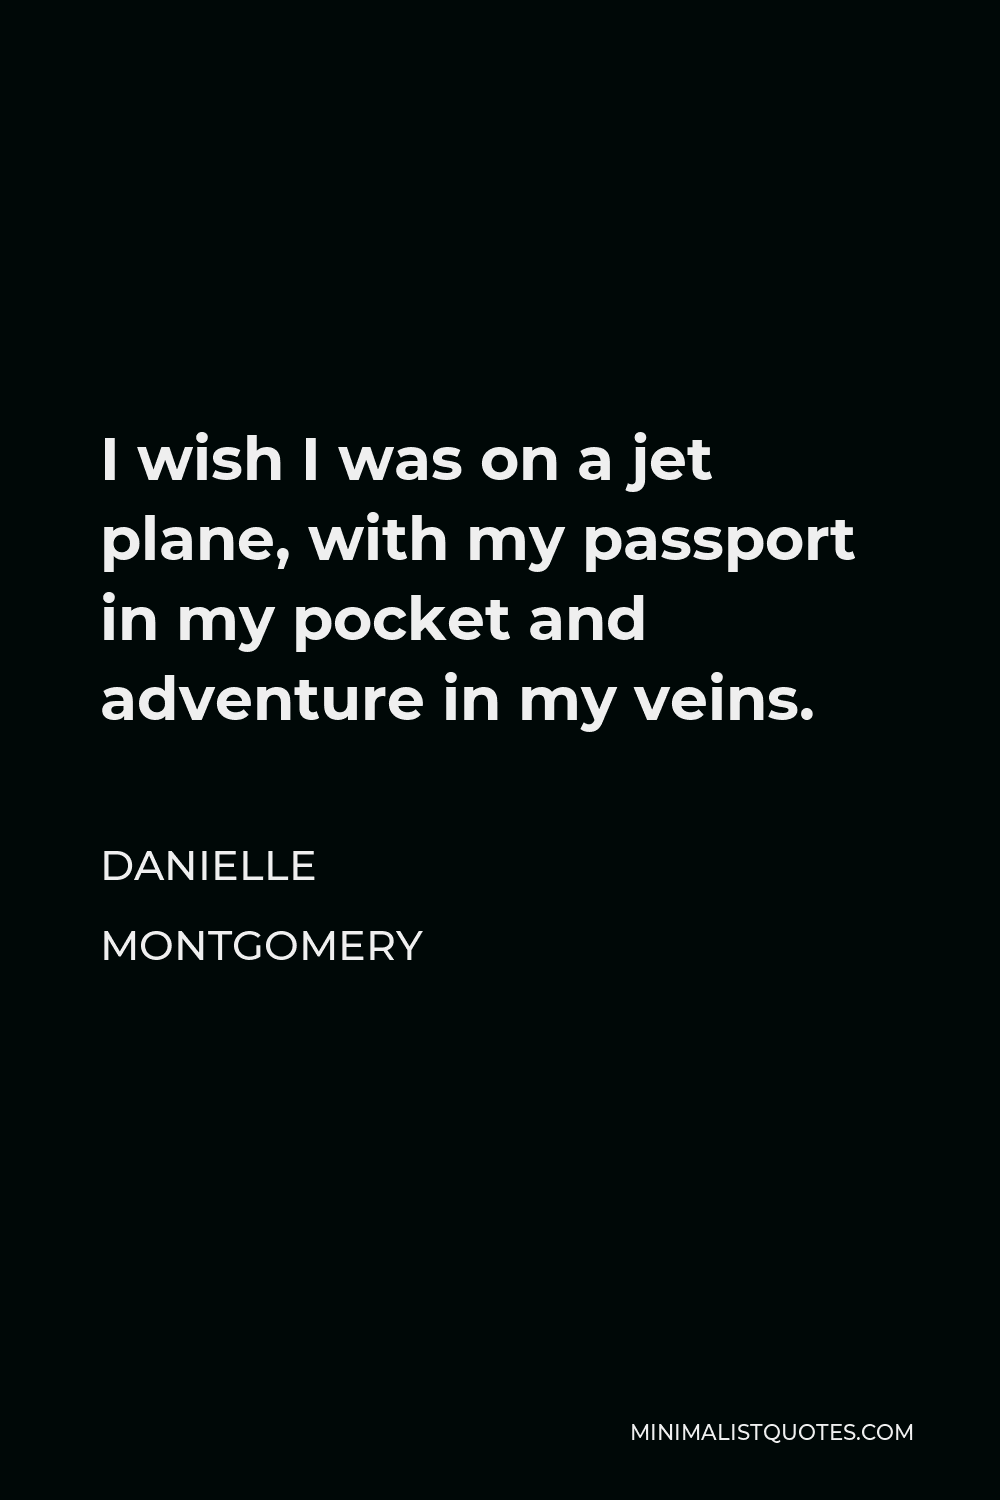 Danielle Montgomery Quote - I wish I was on a jet plane, with my passport in my pocket and adventure in my veins.